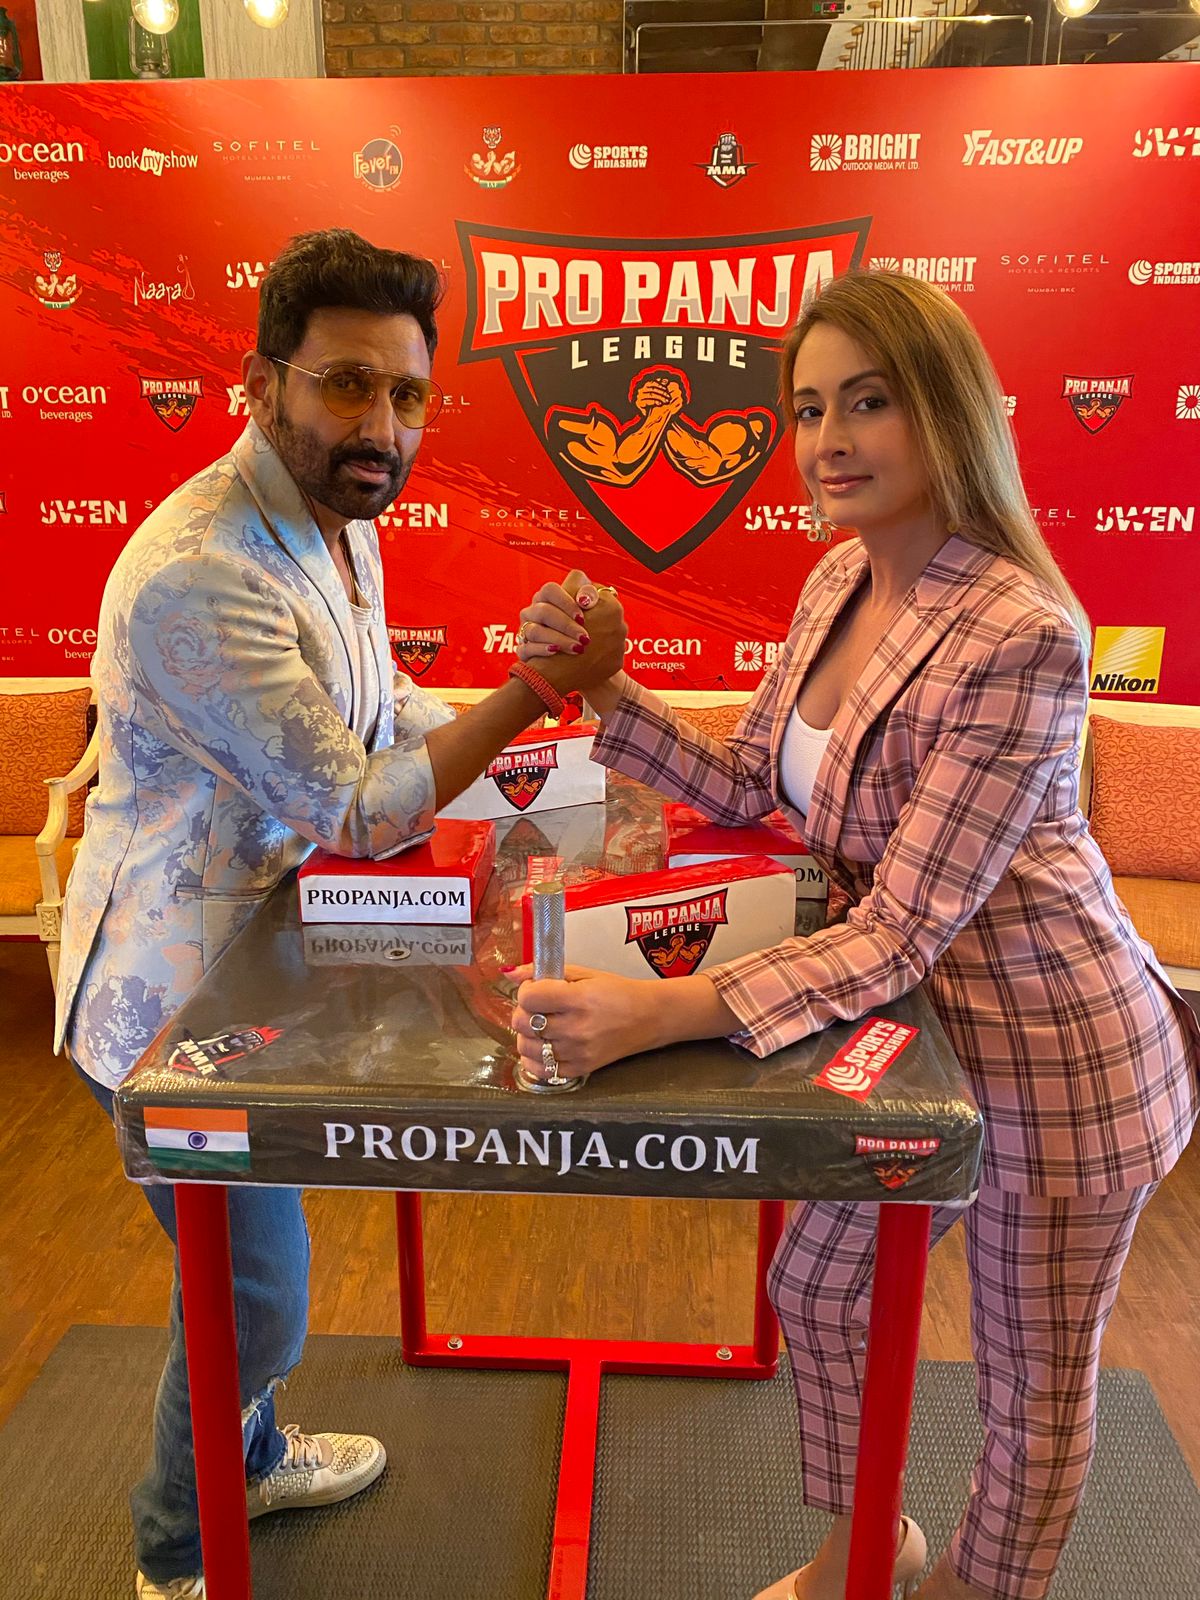 Can’t Keep Calm: Just Three Days To Go For ‘Pro Panja League’ tournament by Preeti Jhangiani and Parvin Dabas, deets inside